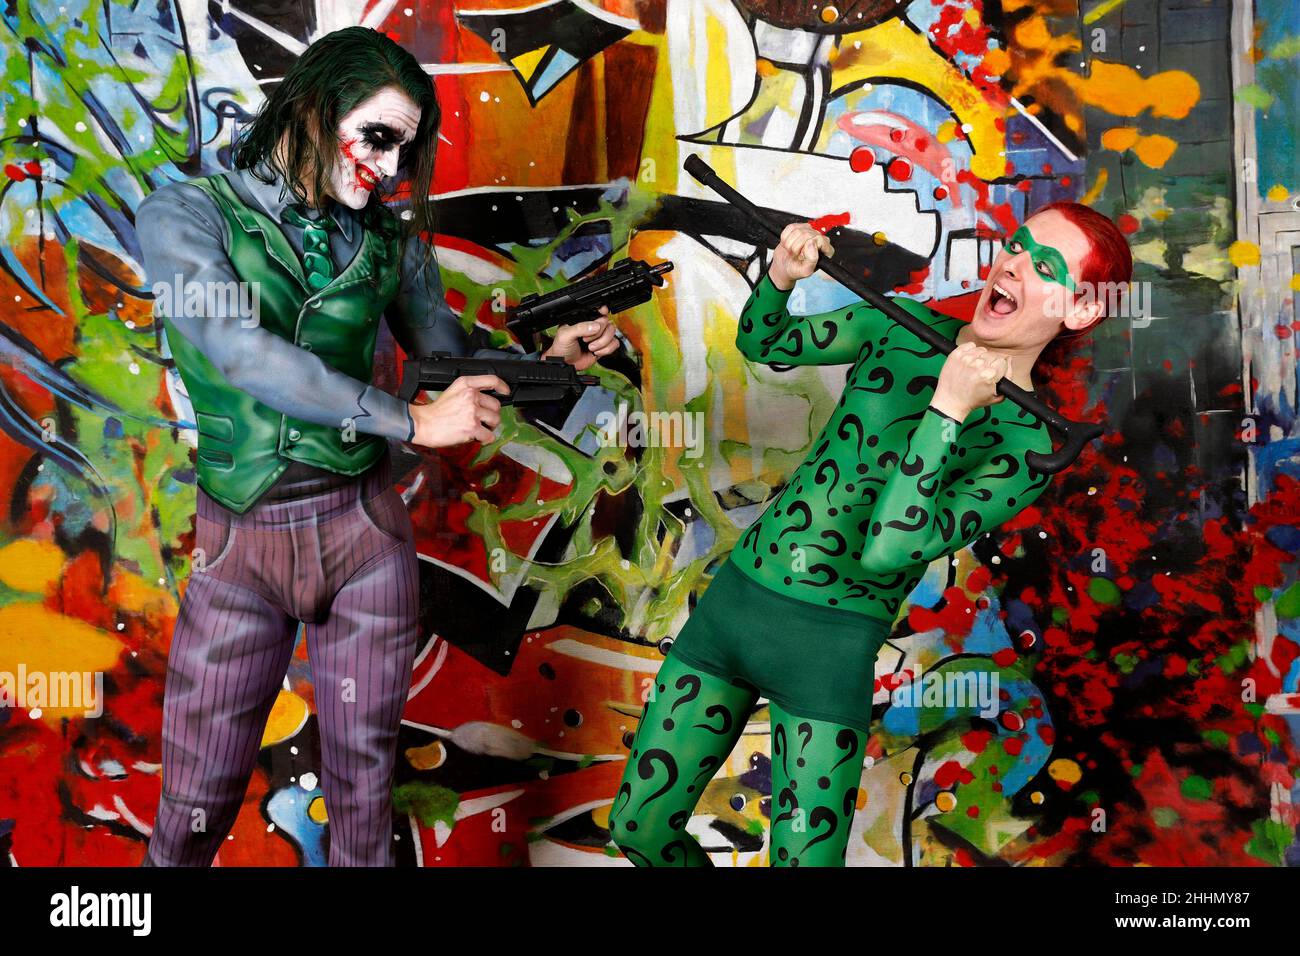 GEEK ART - Bodypainting and Transformaking: Joker meets Riddler Photoshooting with Patrick Kiel as Joker and Paul Skupin as Riddler at Duesterwald studio on January 23, 2022 in Hamelin - A project by the photographer Tschiponnique Skupin and the bodypainter Enrico Lein Stock Photo